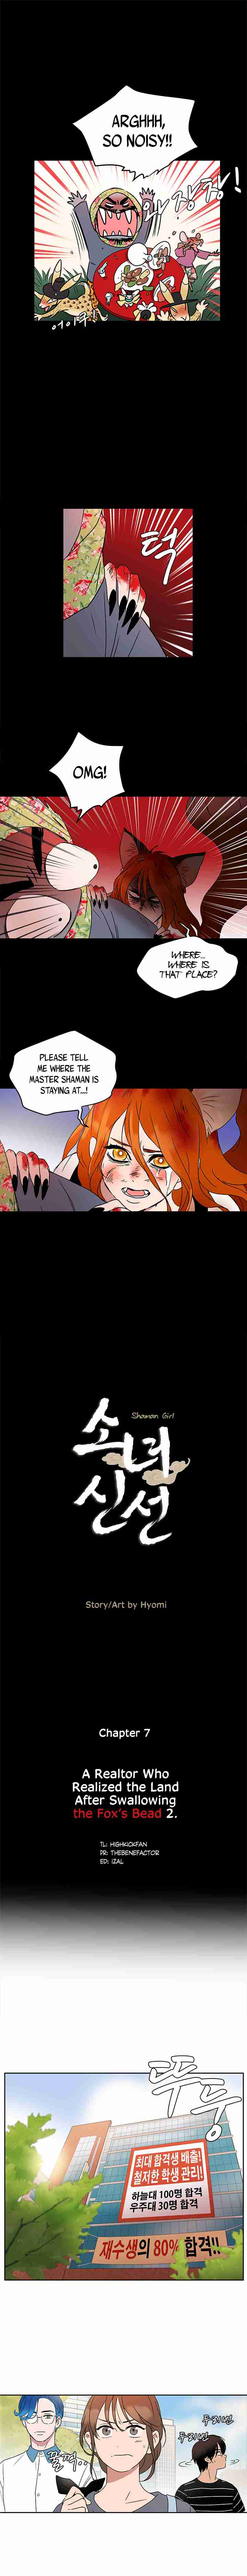 Shaman Girl Ch. 7 A Realtor who Realized the land After swallowing the Fox’s bead 2